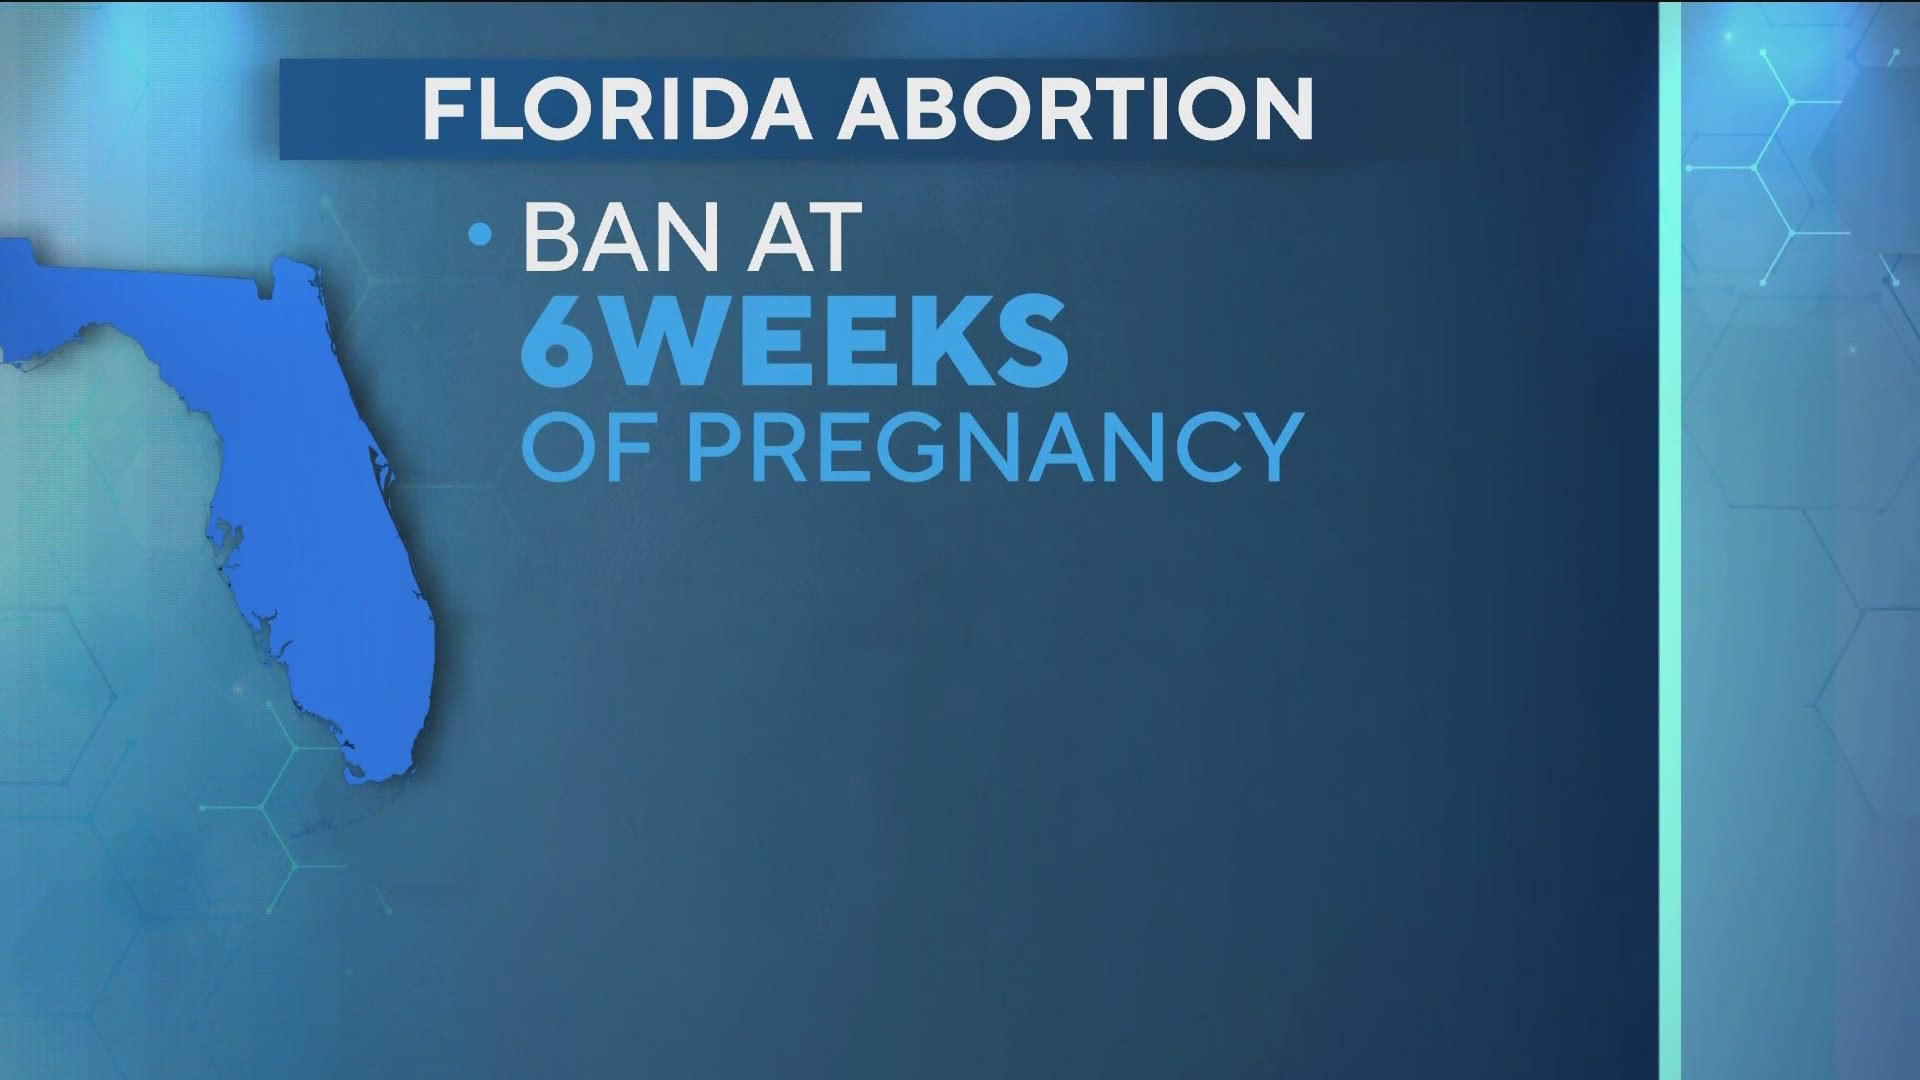 Watch this video to see what President Biden had to say about Florida's new abortion ban.